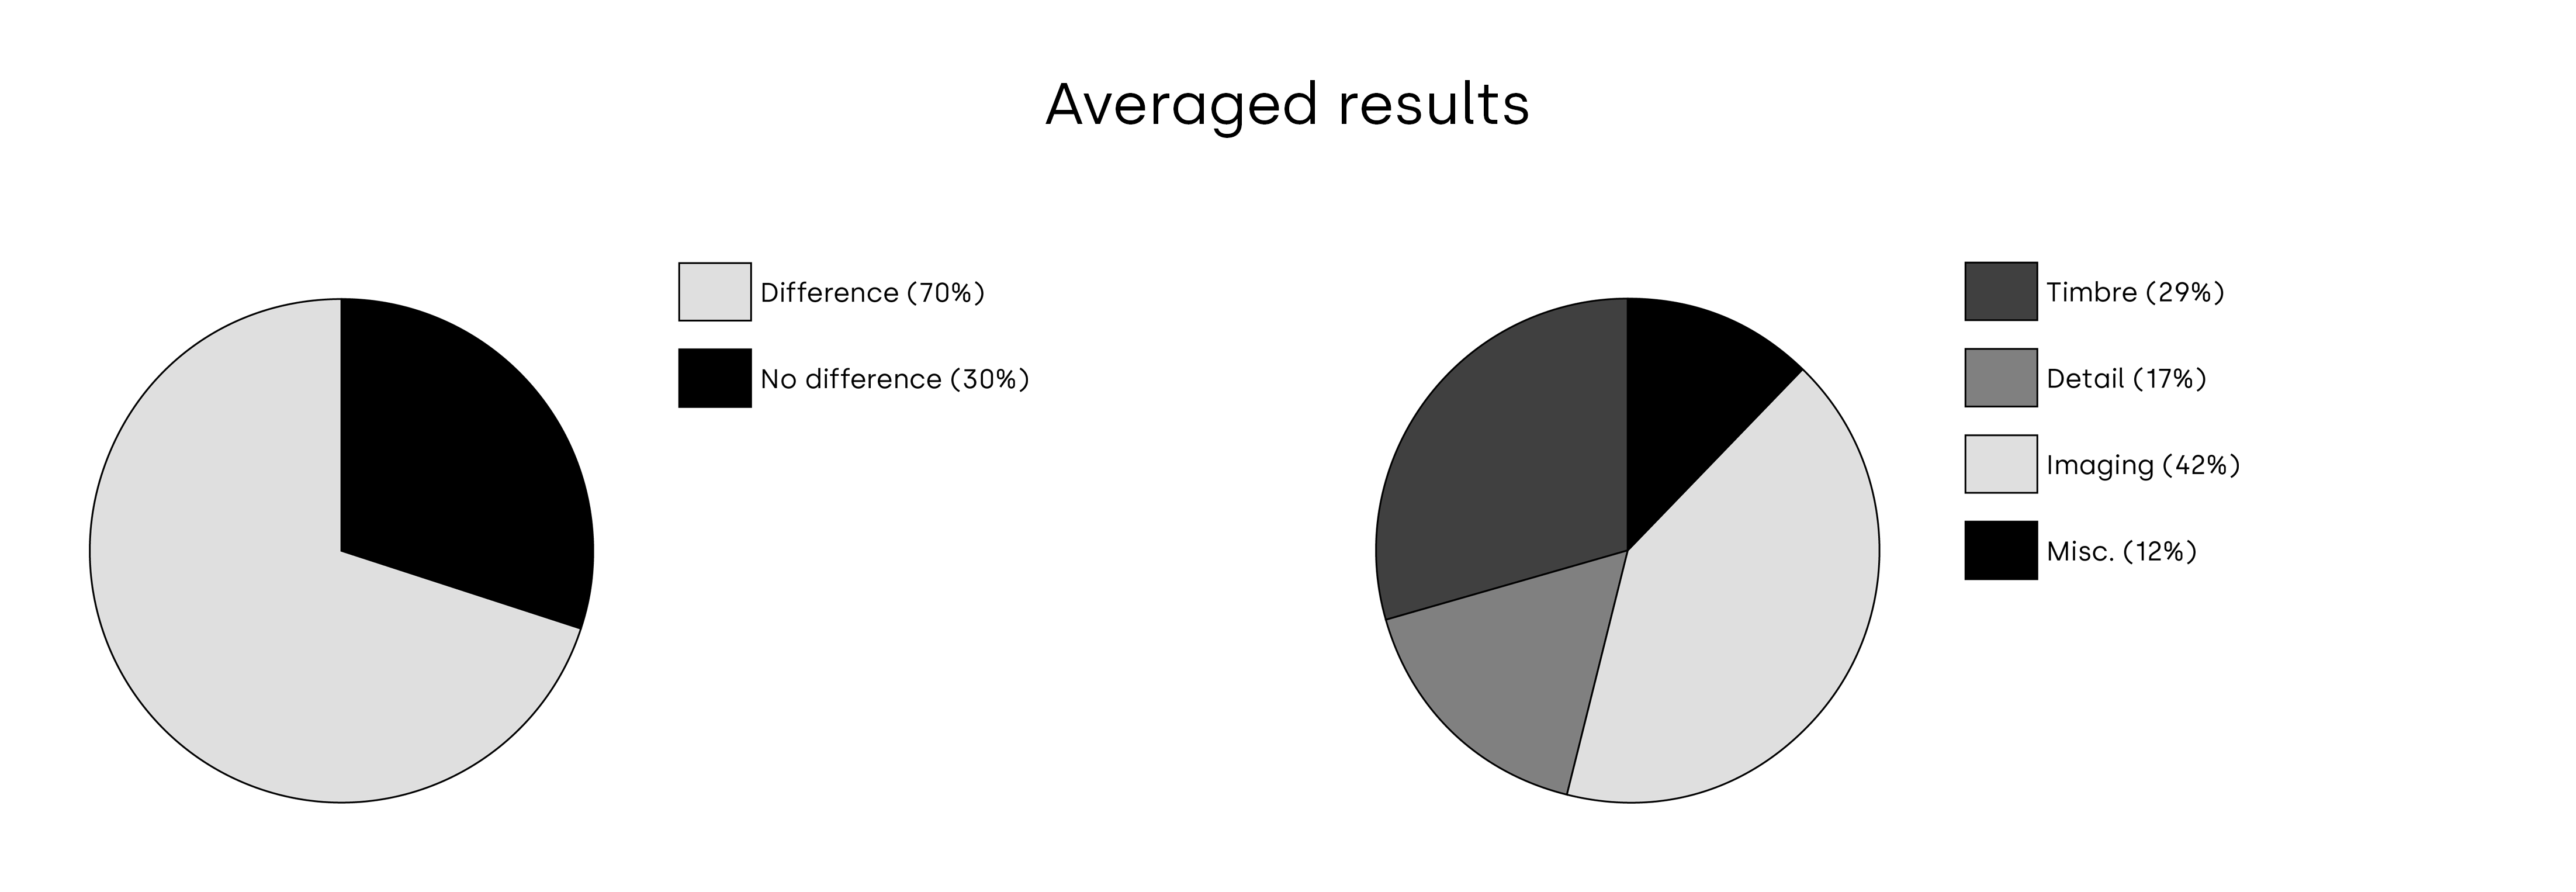 TRPTK Cable Comparison 2023 - Averaged results